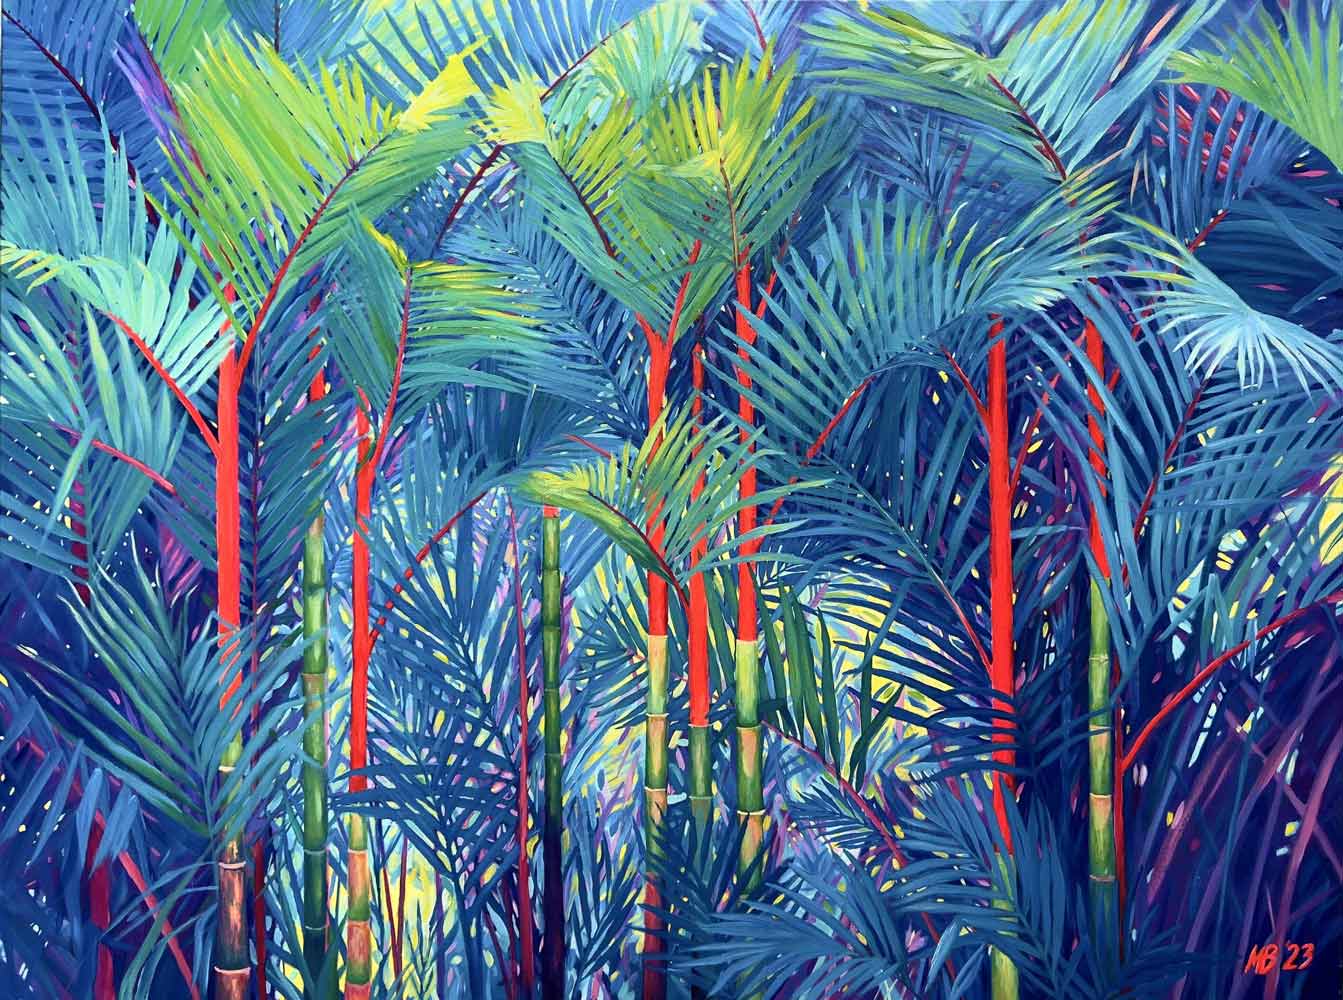 Buy painting online Singapore Exquisite Art Margarita Buttenmueller Red Palm Forest